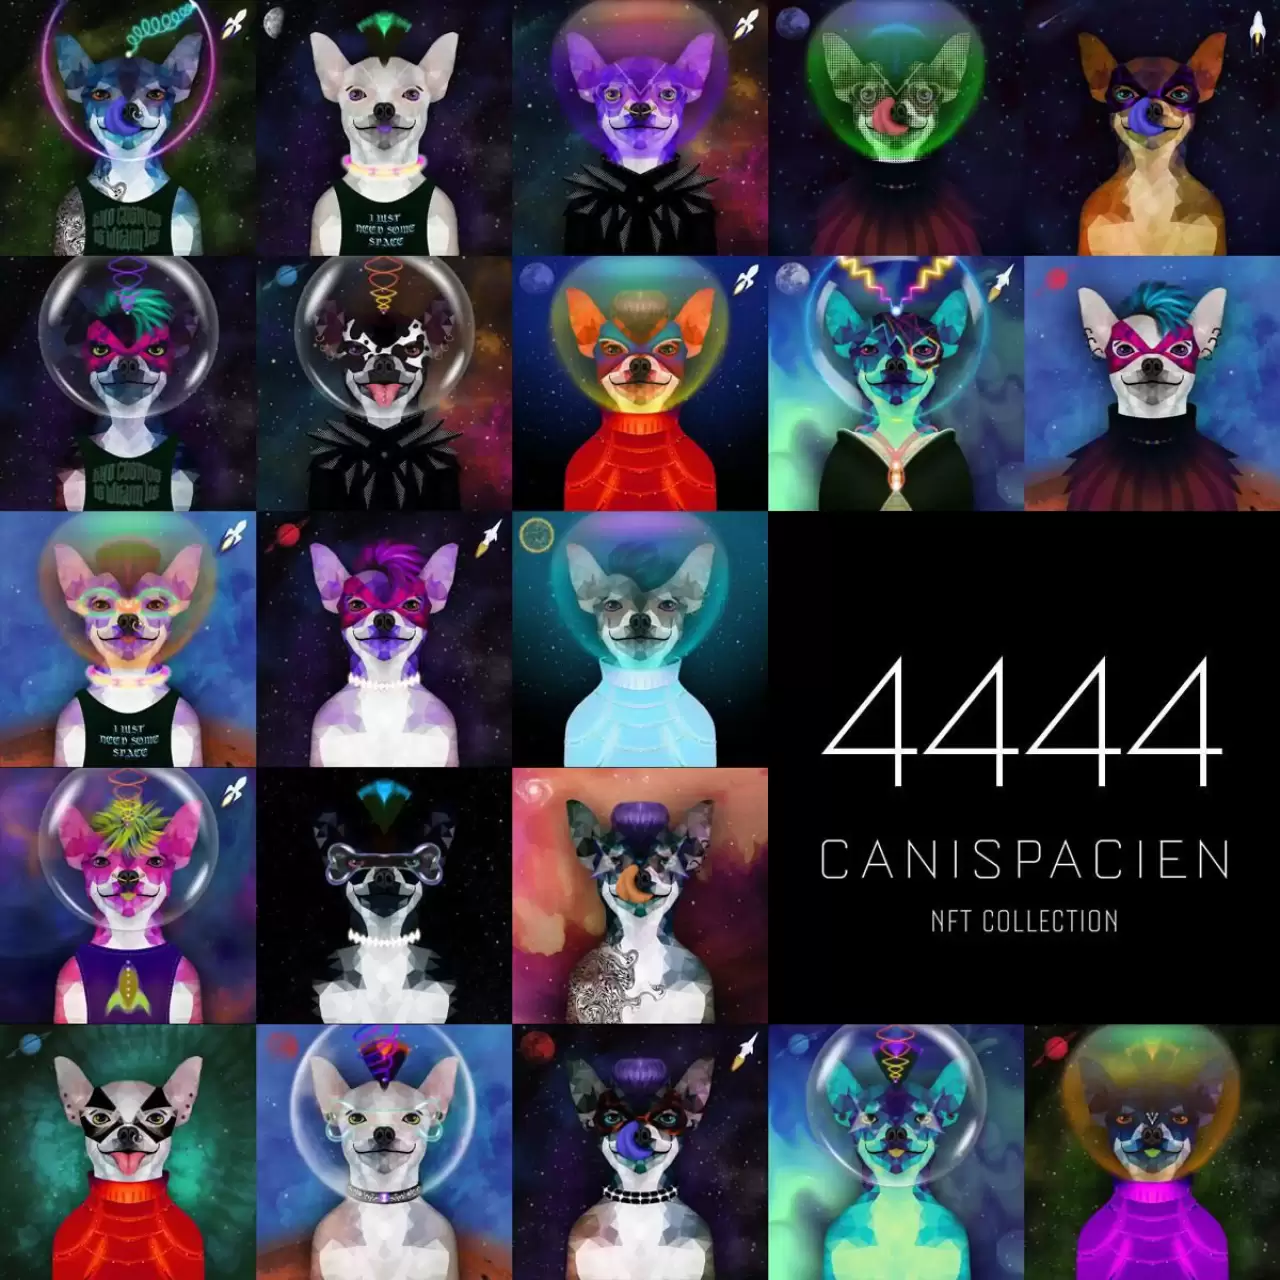 "Space dog" inspired NFT Collection, 'CaniSpacien' sells out img#1